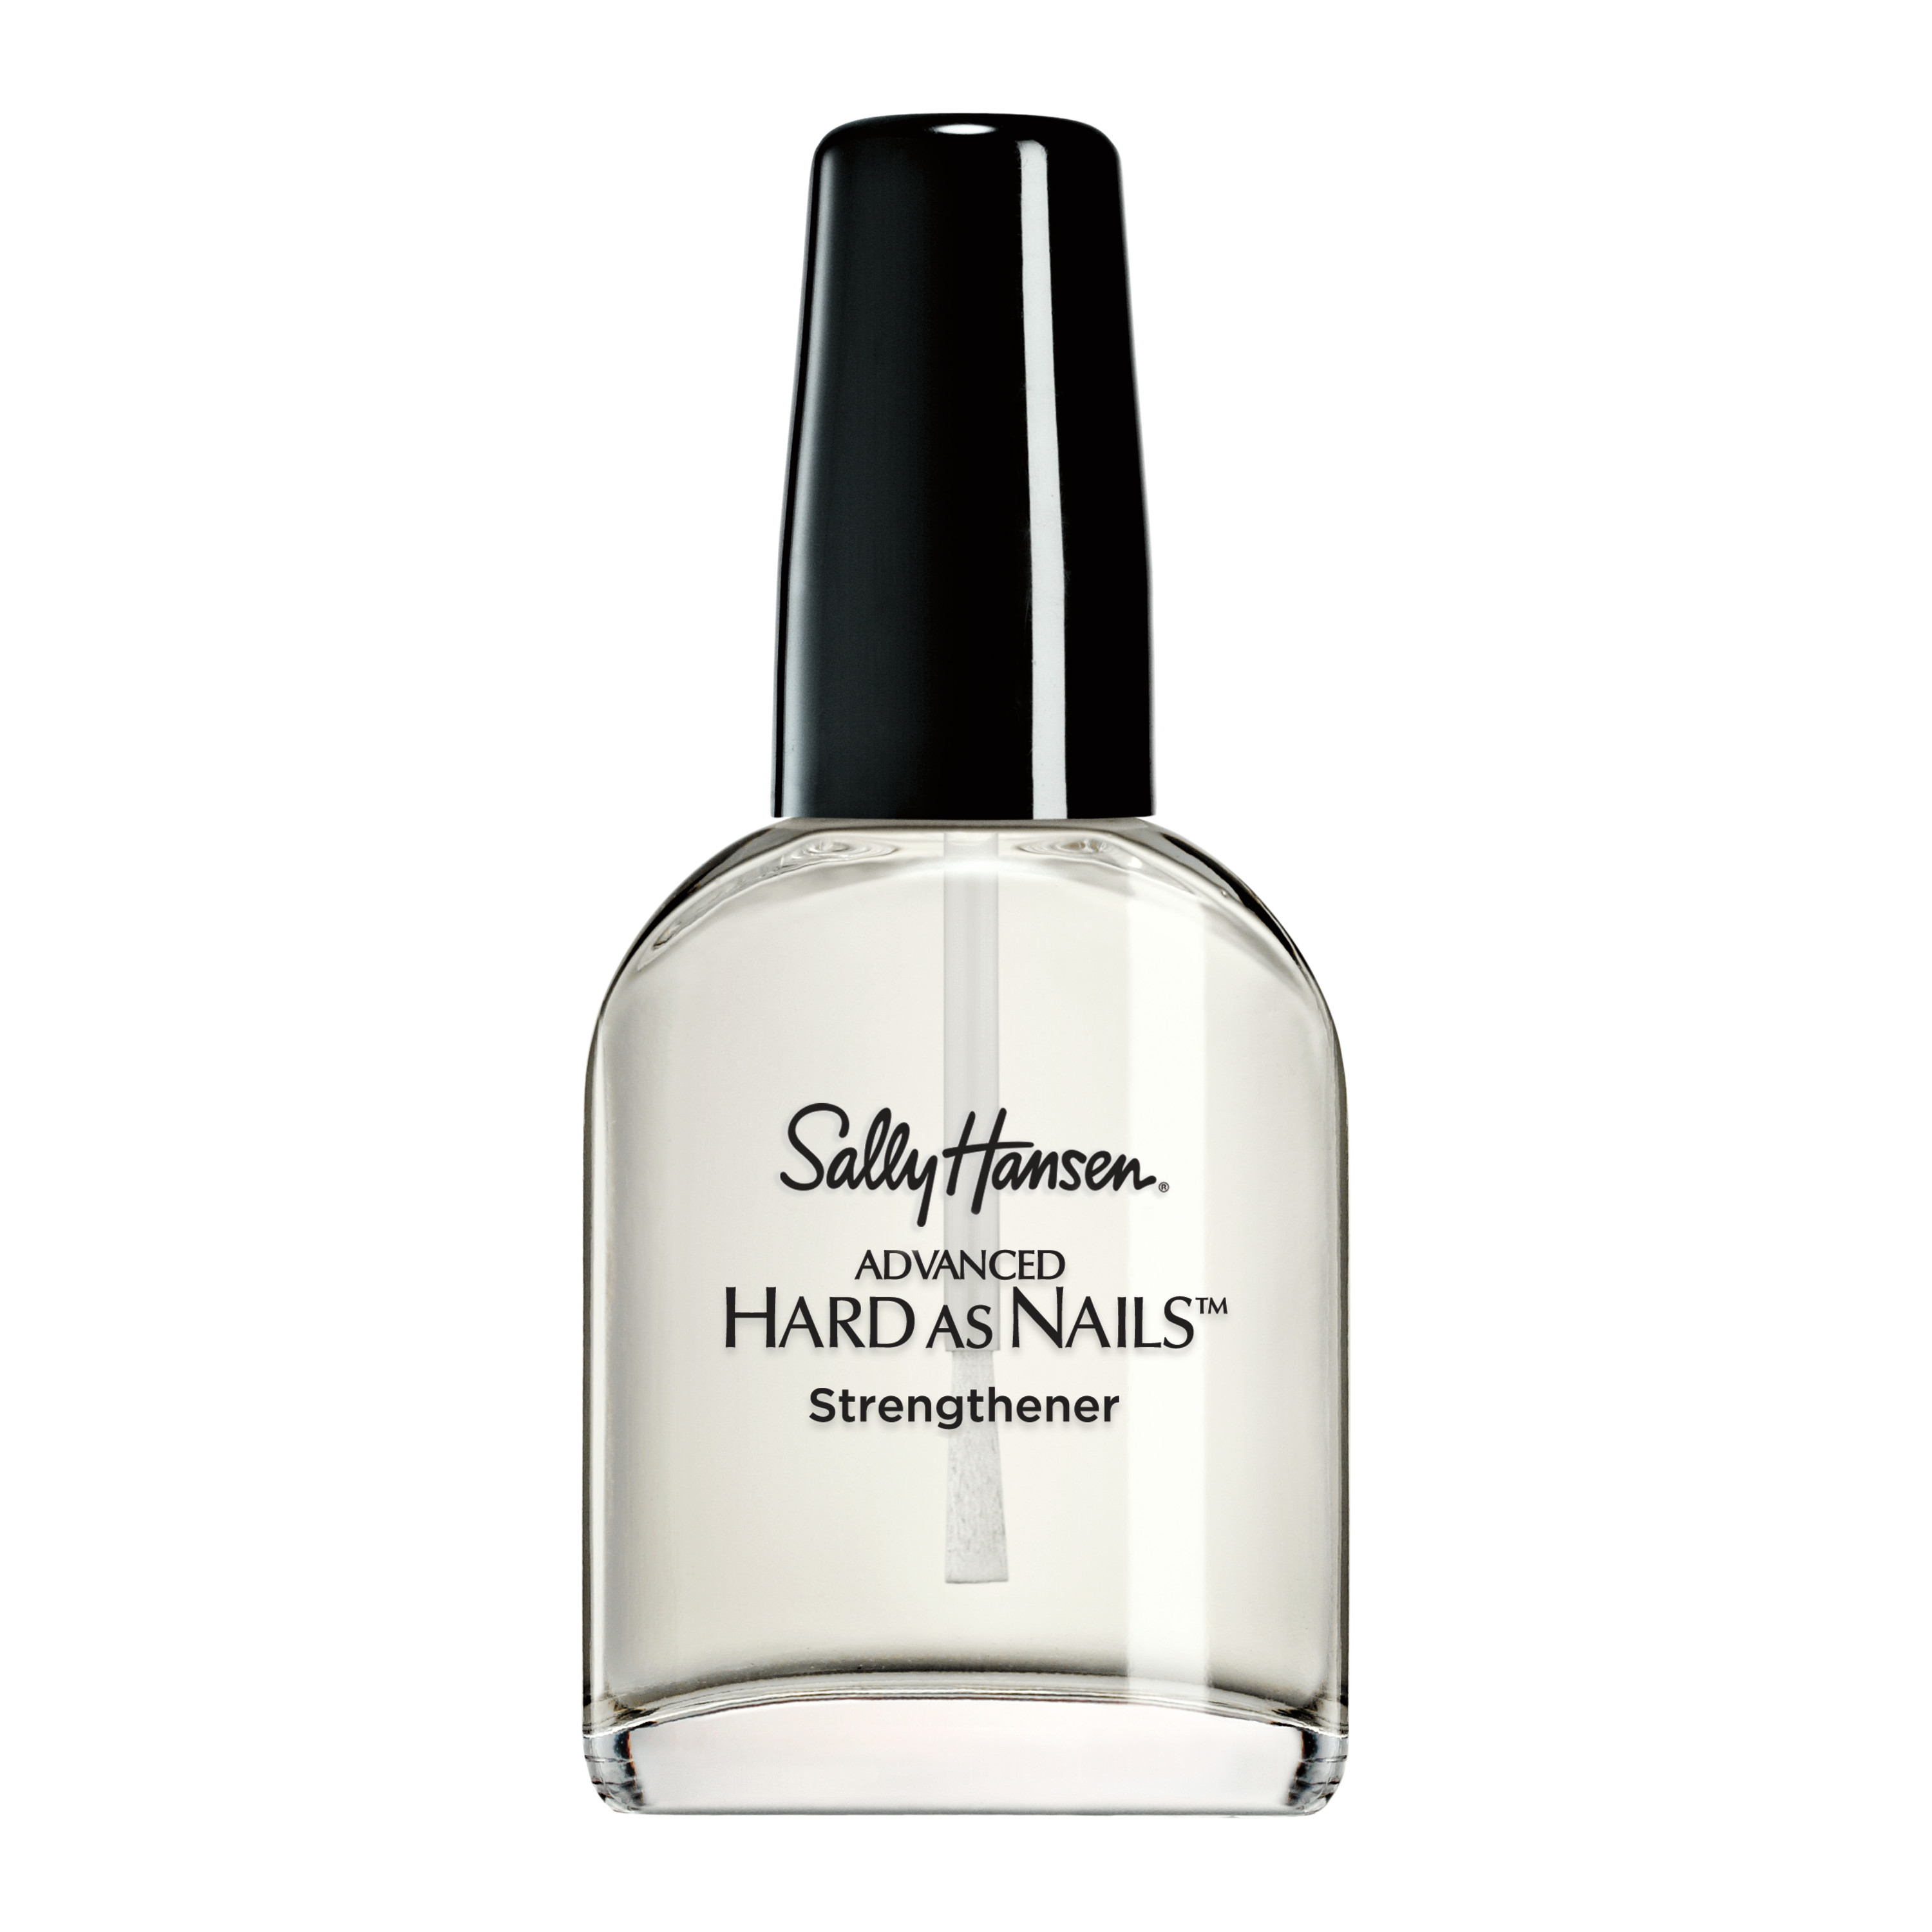 Sally Hansen Advanced Hard as Nails Strengthener, Clear - image 2 of 9